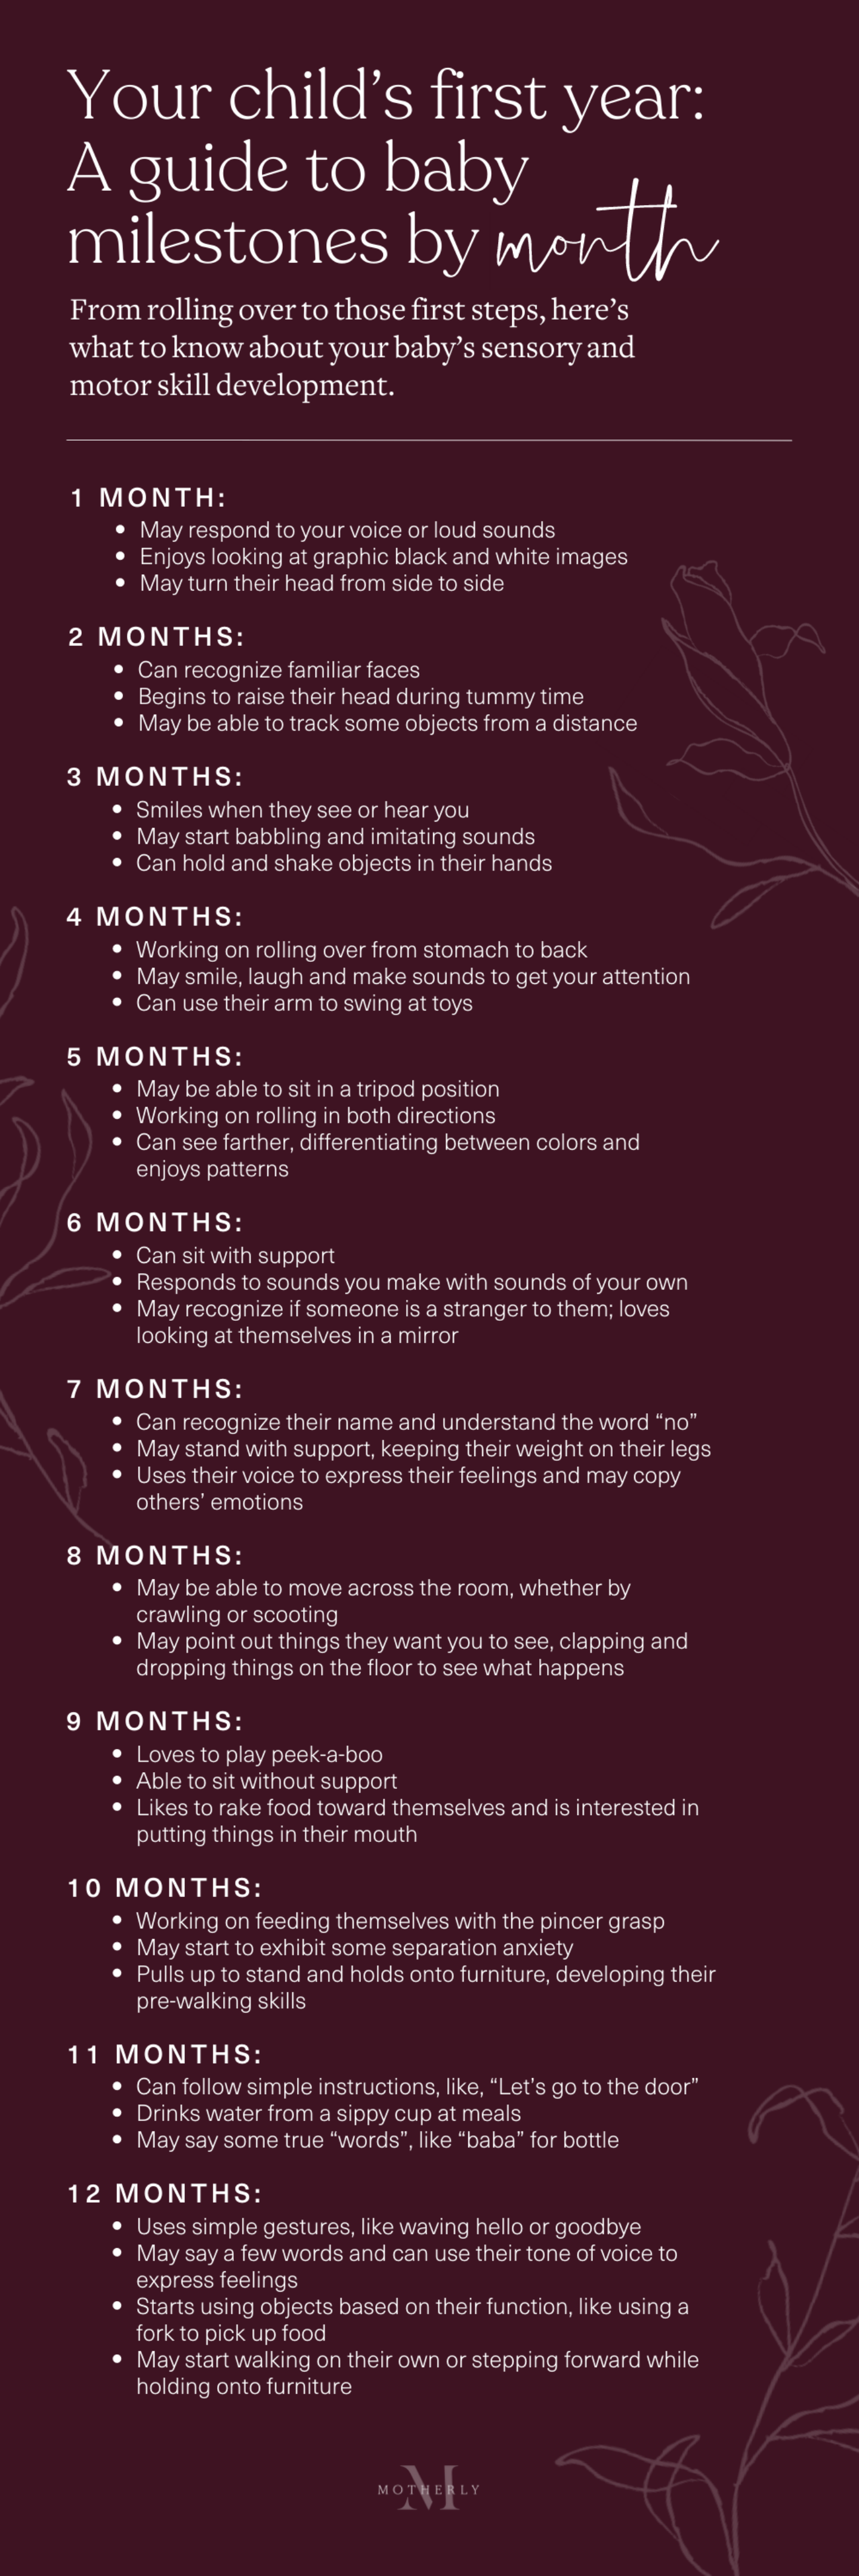 Tummy time milestones by month